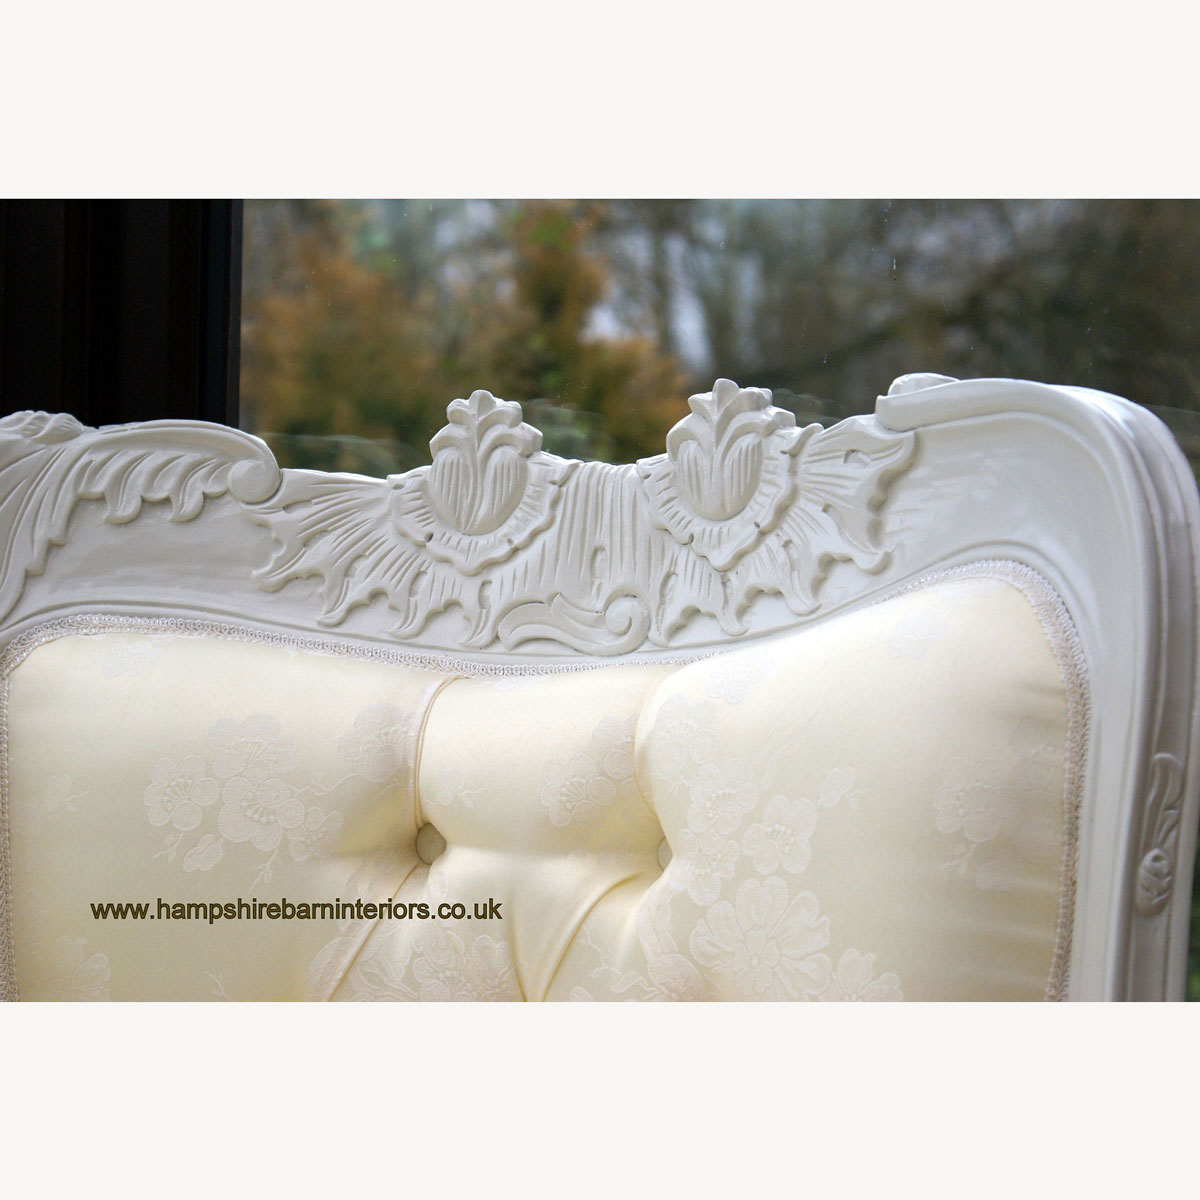 Anna Belle Chaise Antique White With Ivory Fabric 2 - Hampshire Barn Interiors - Anna Belle Chaise Antique White With Ivory Fabric -